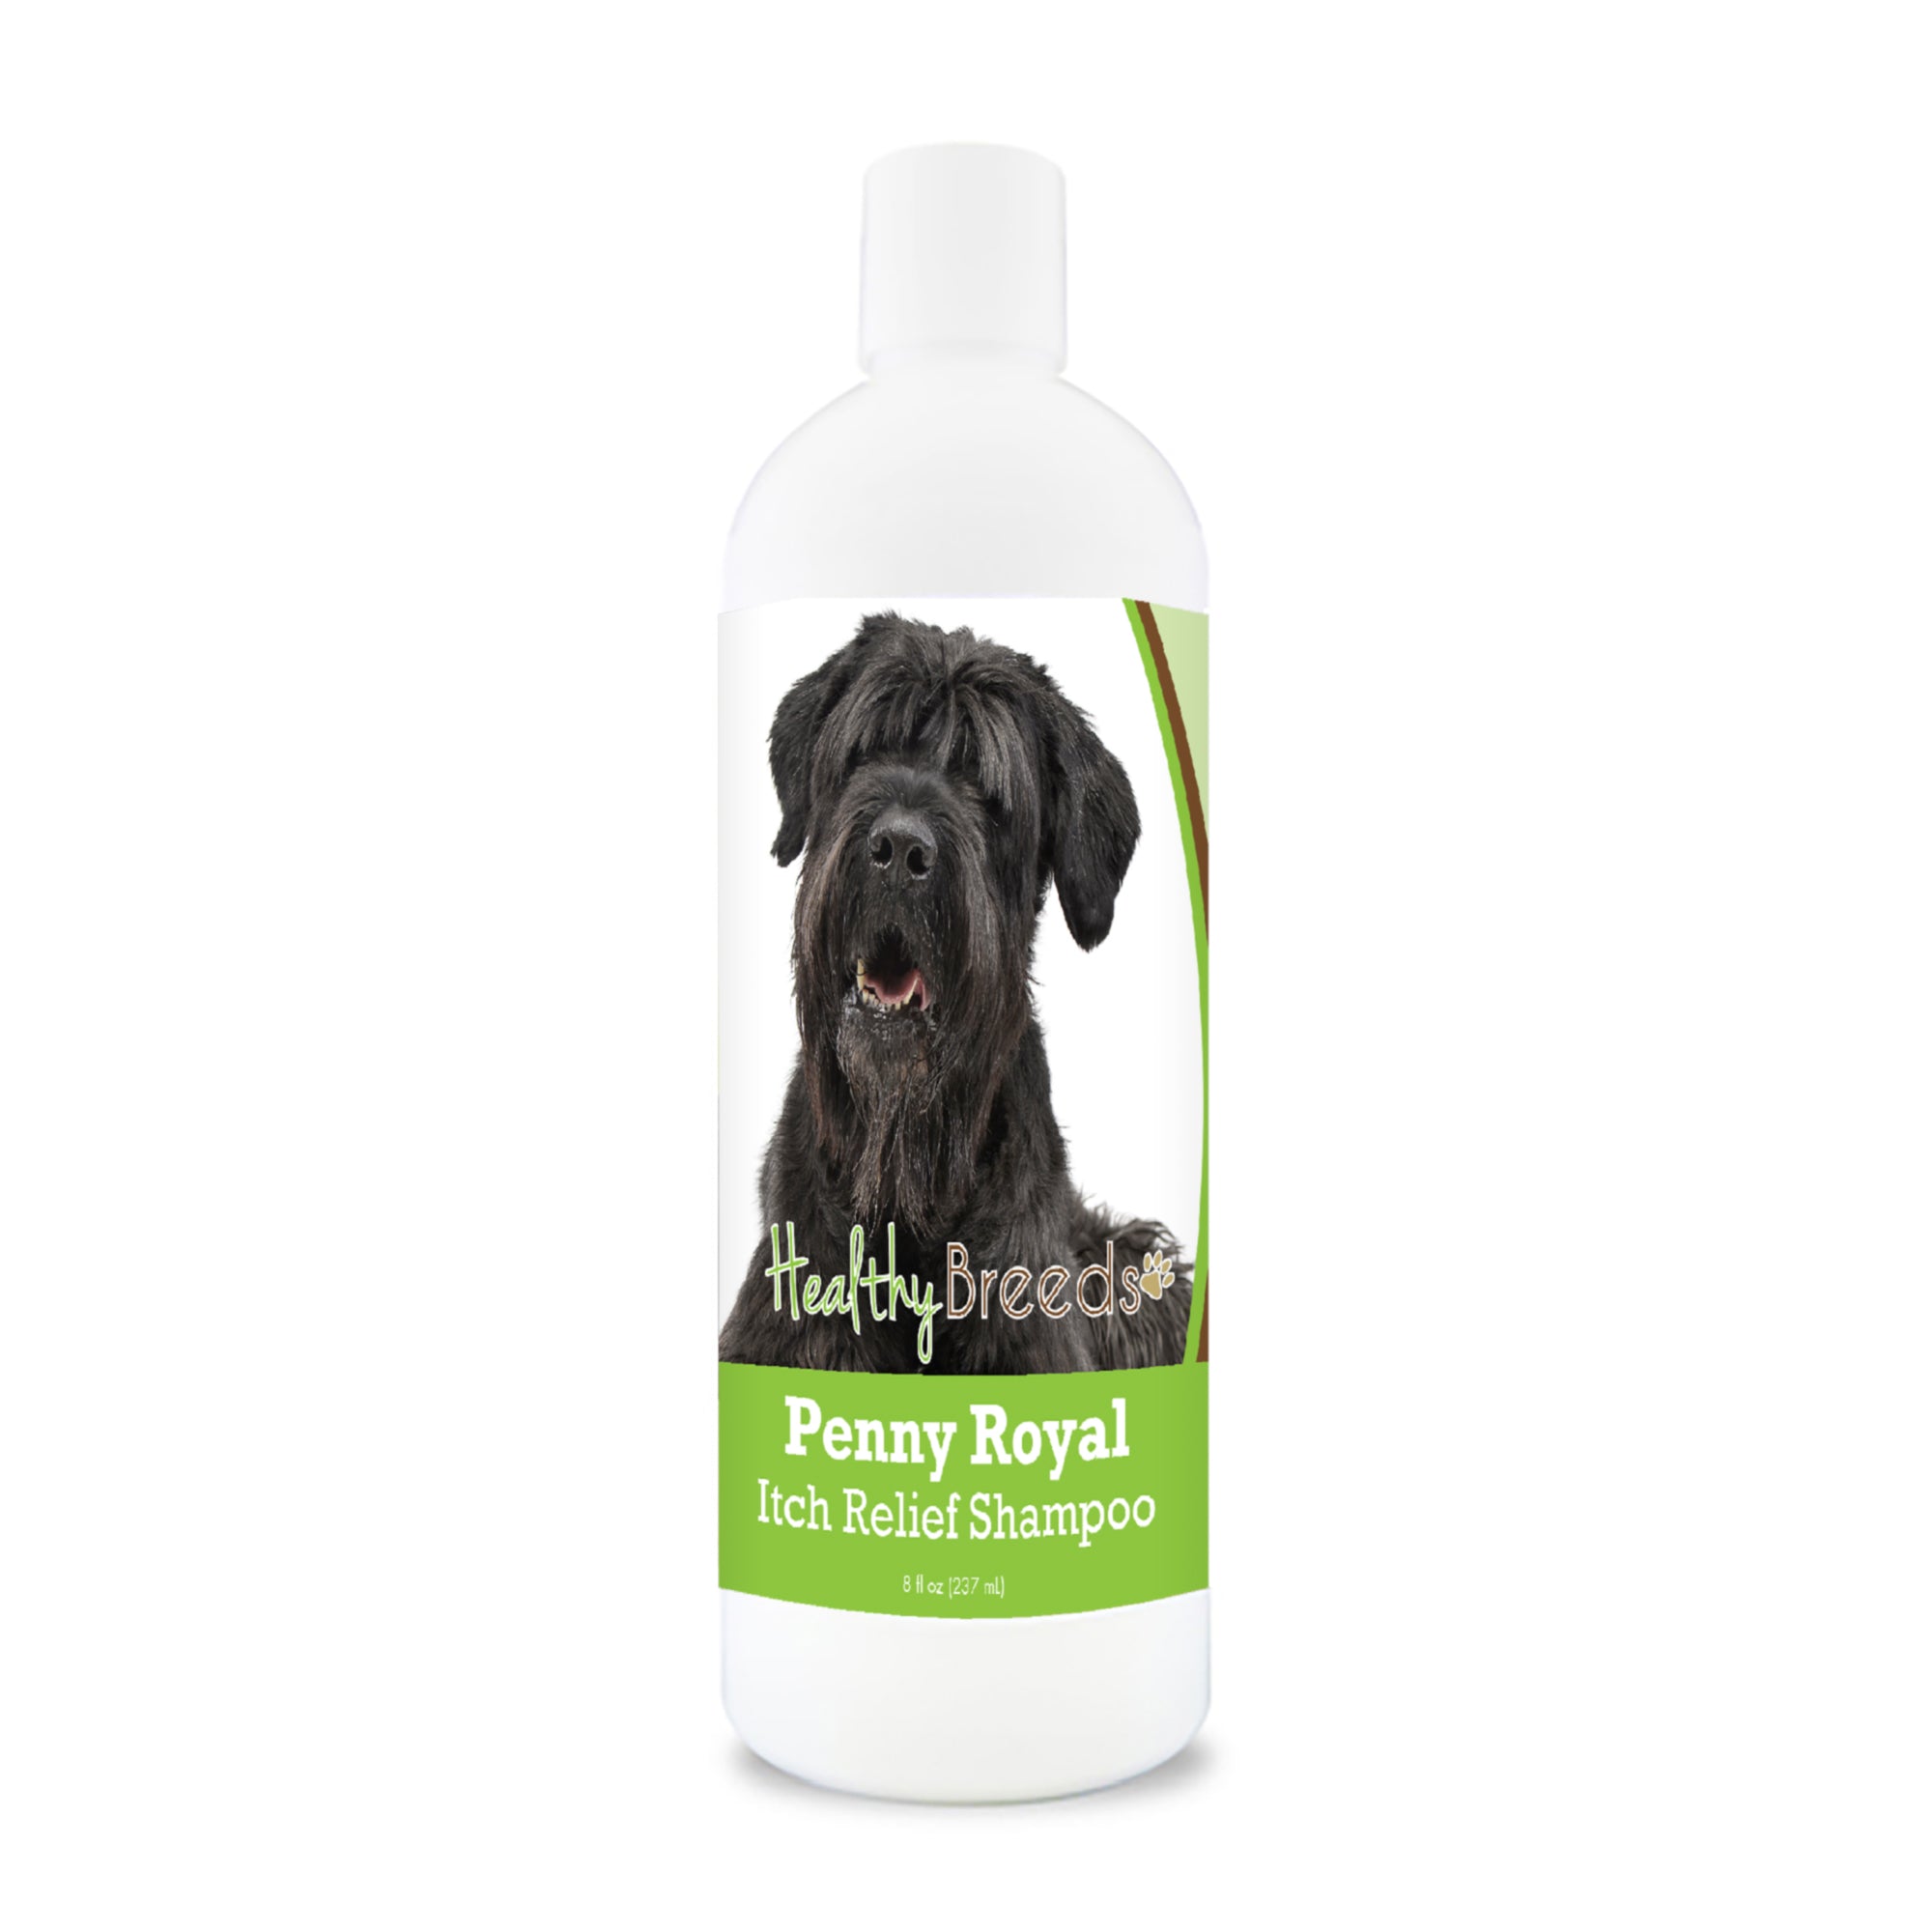 Black Russian Terrier Penny Royal Itch Relief Shampoo 8 oz